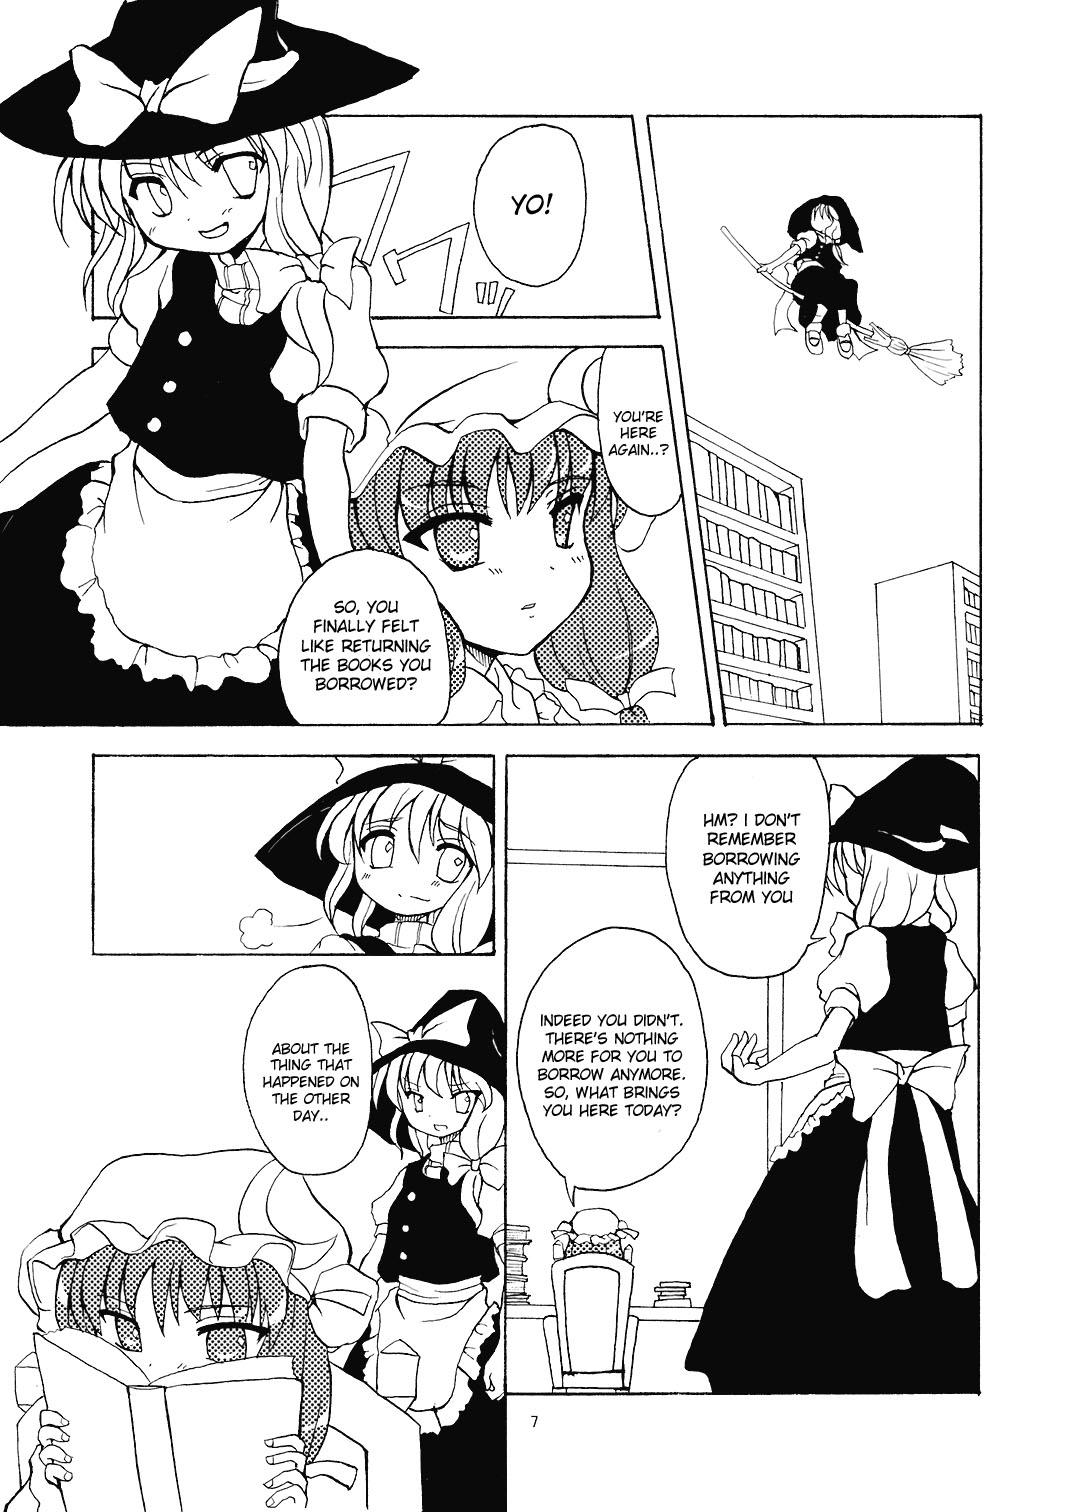 Gordita Alice in Scarlet Mansion 2 - Touhou project Perverted - Page 7